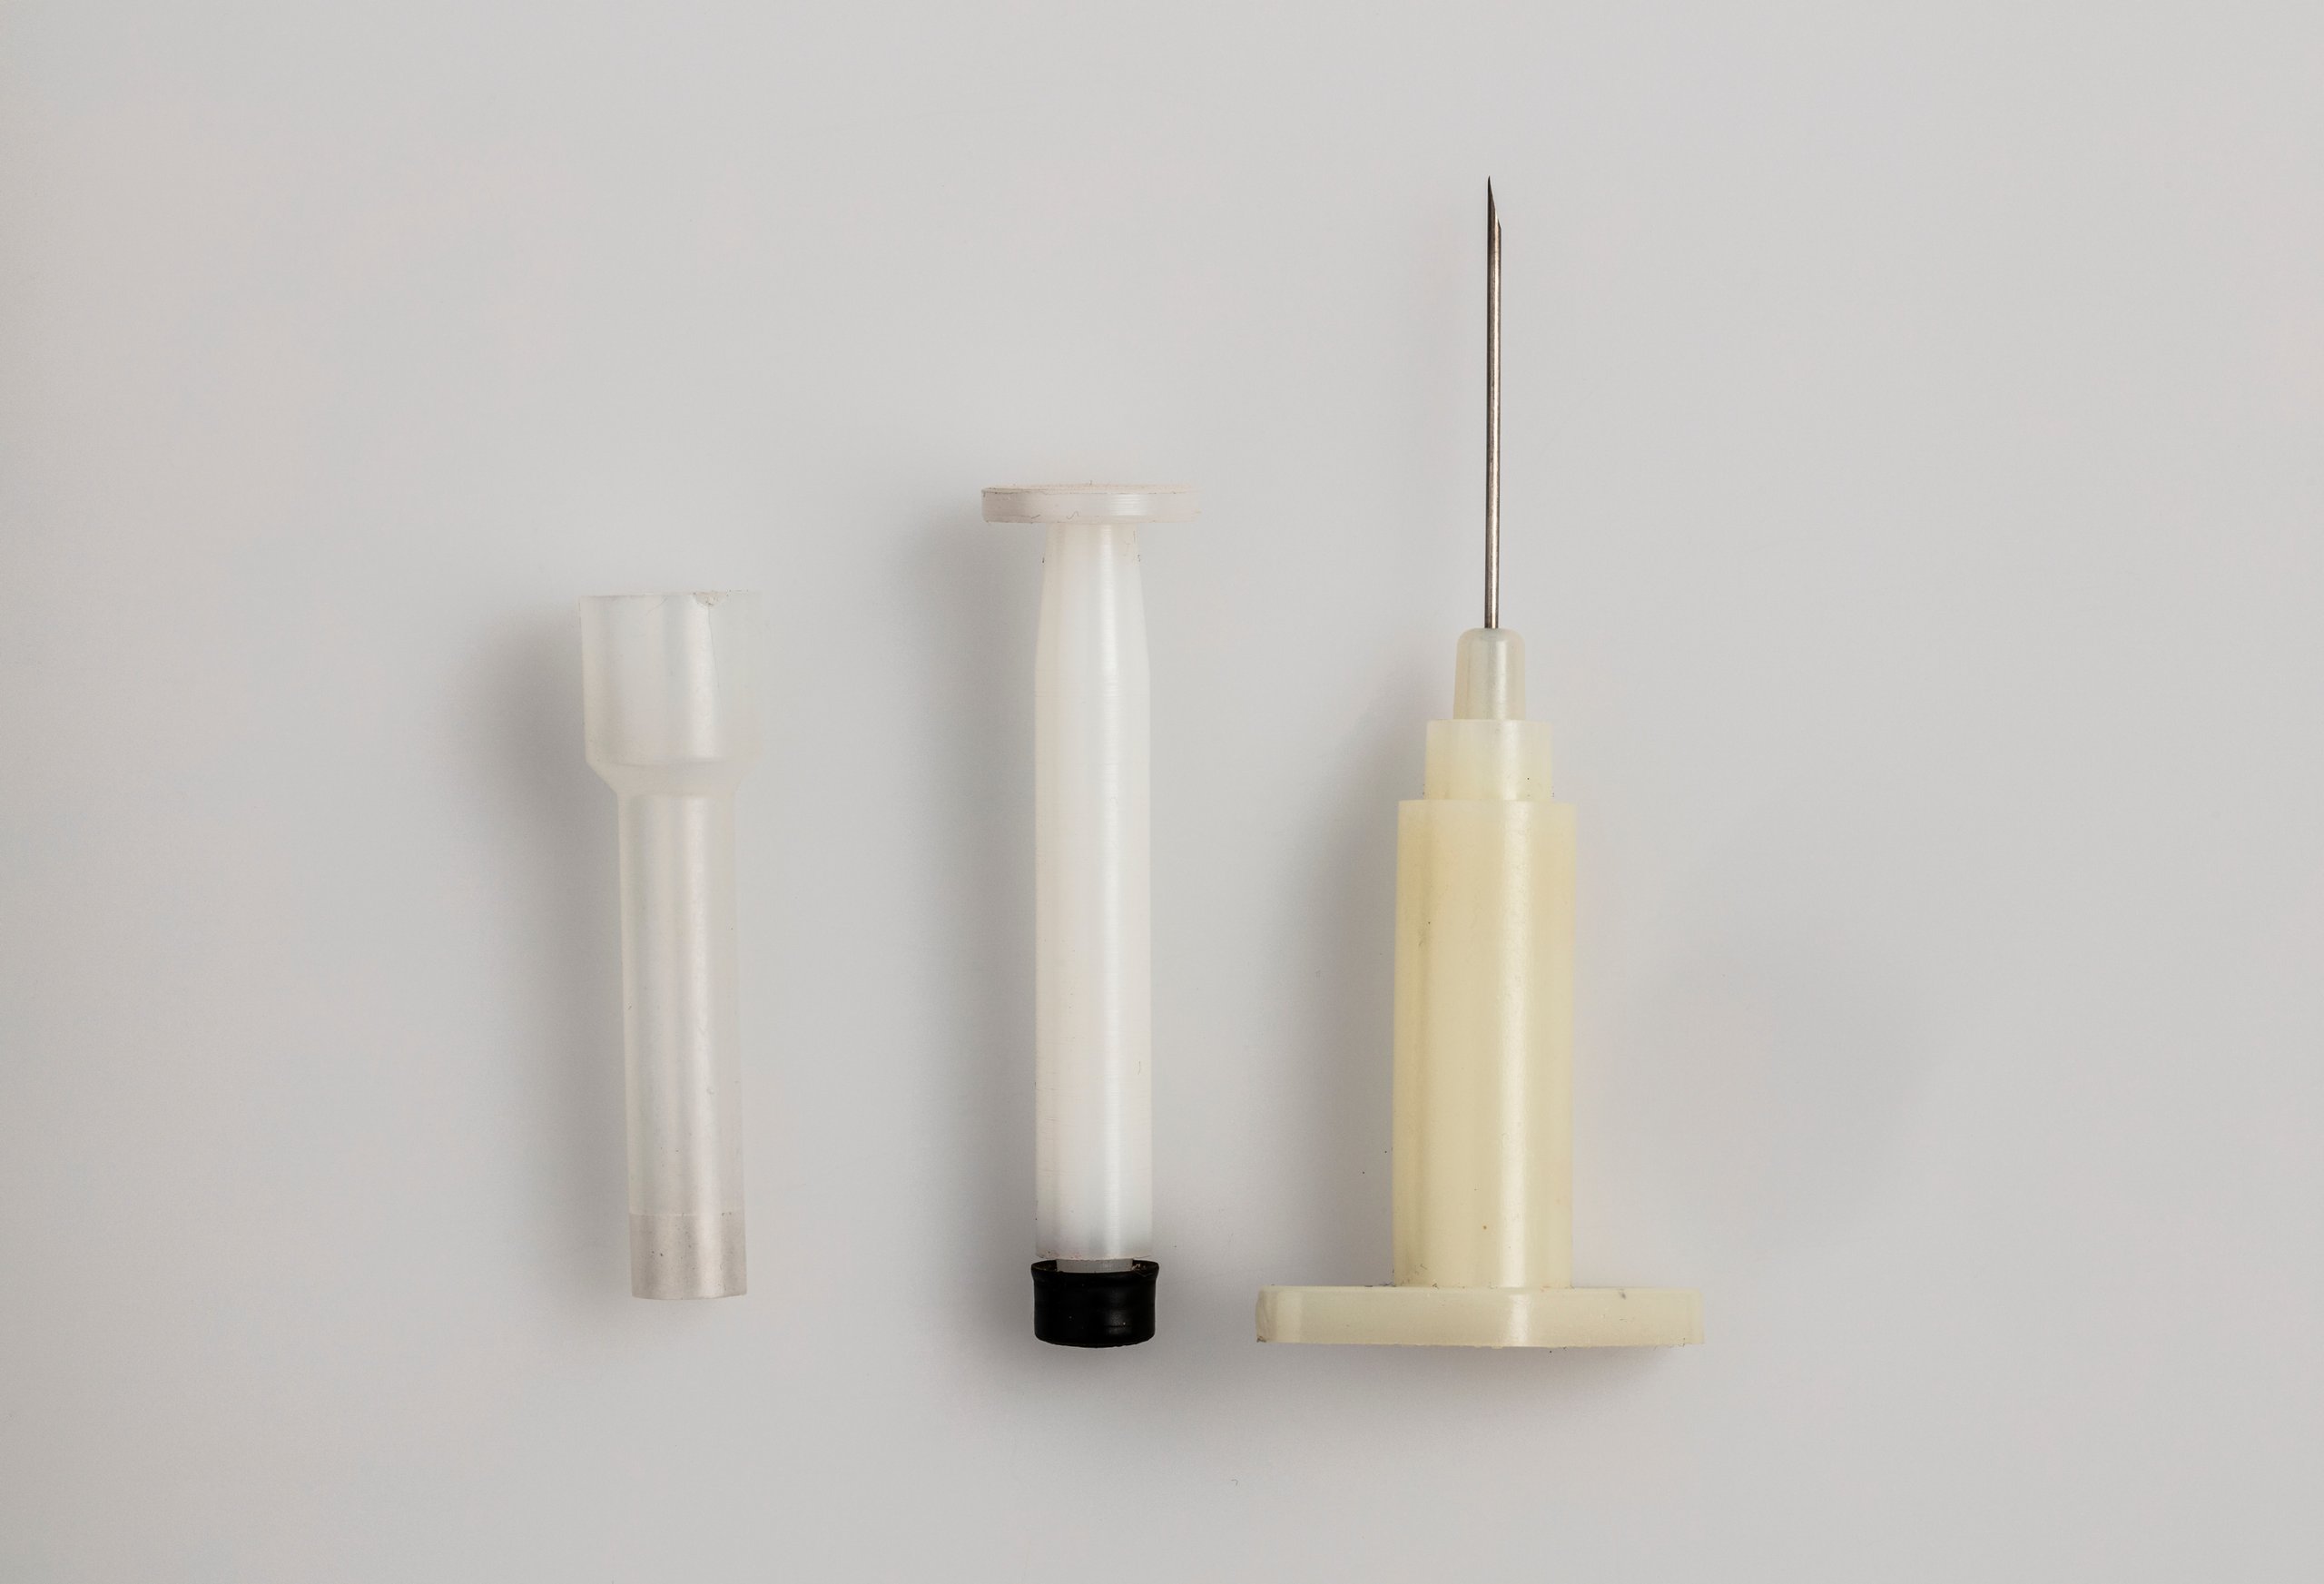 Disposable plastic syringe by Harry Whillis and Charles Rothauser